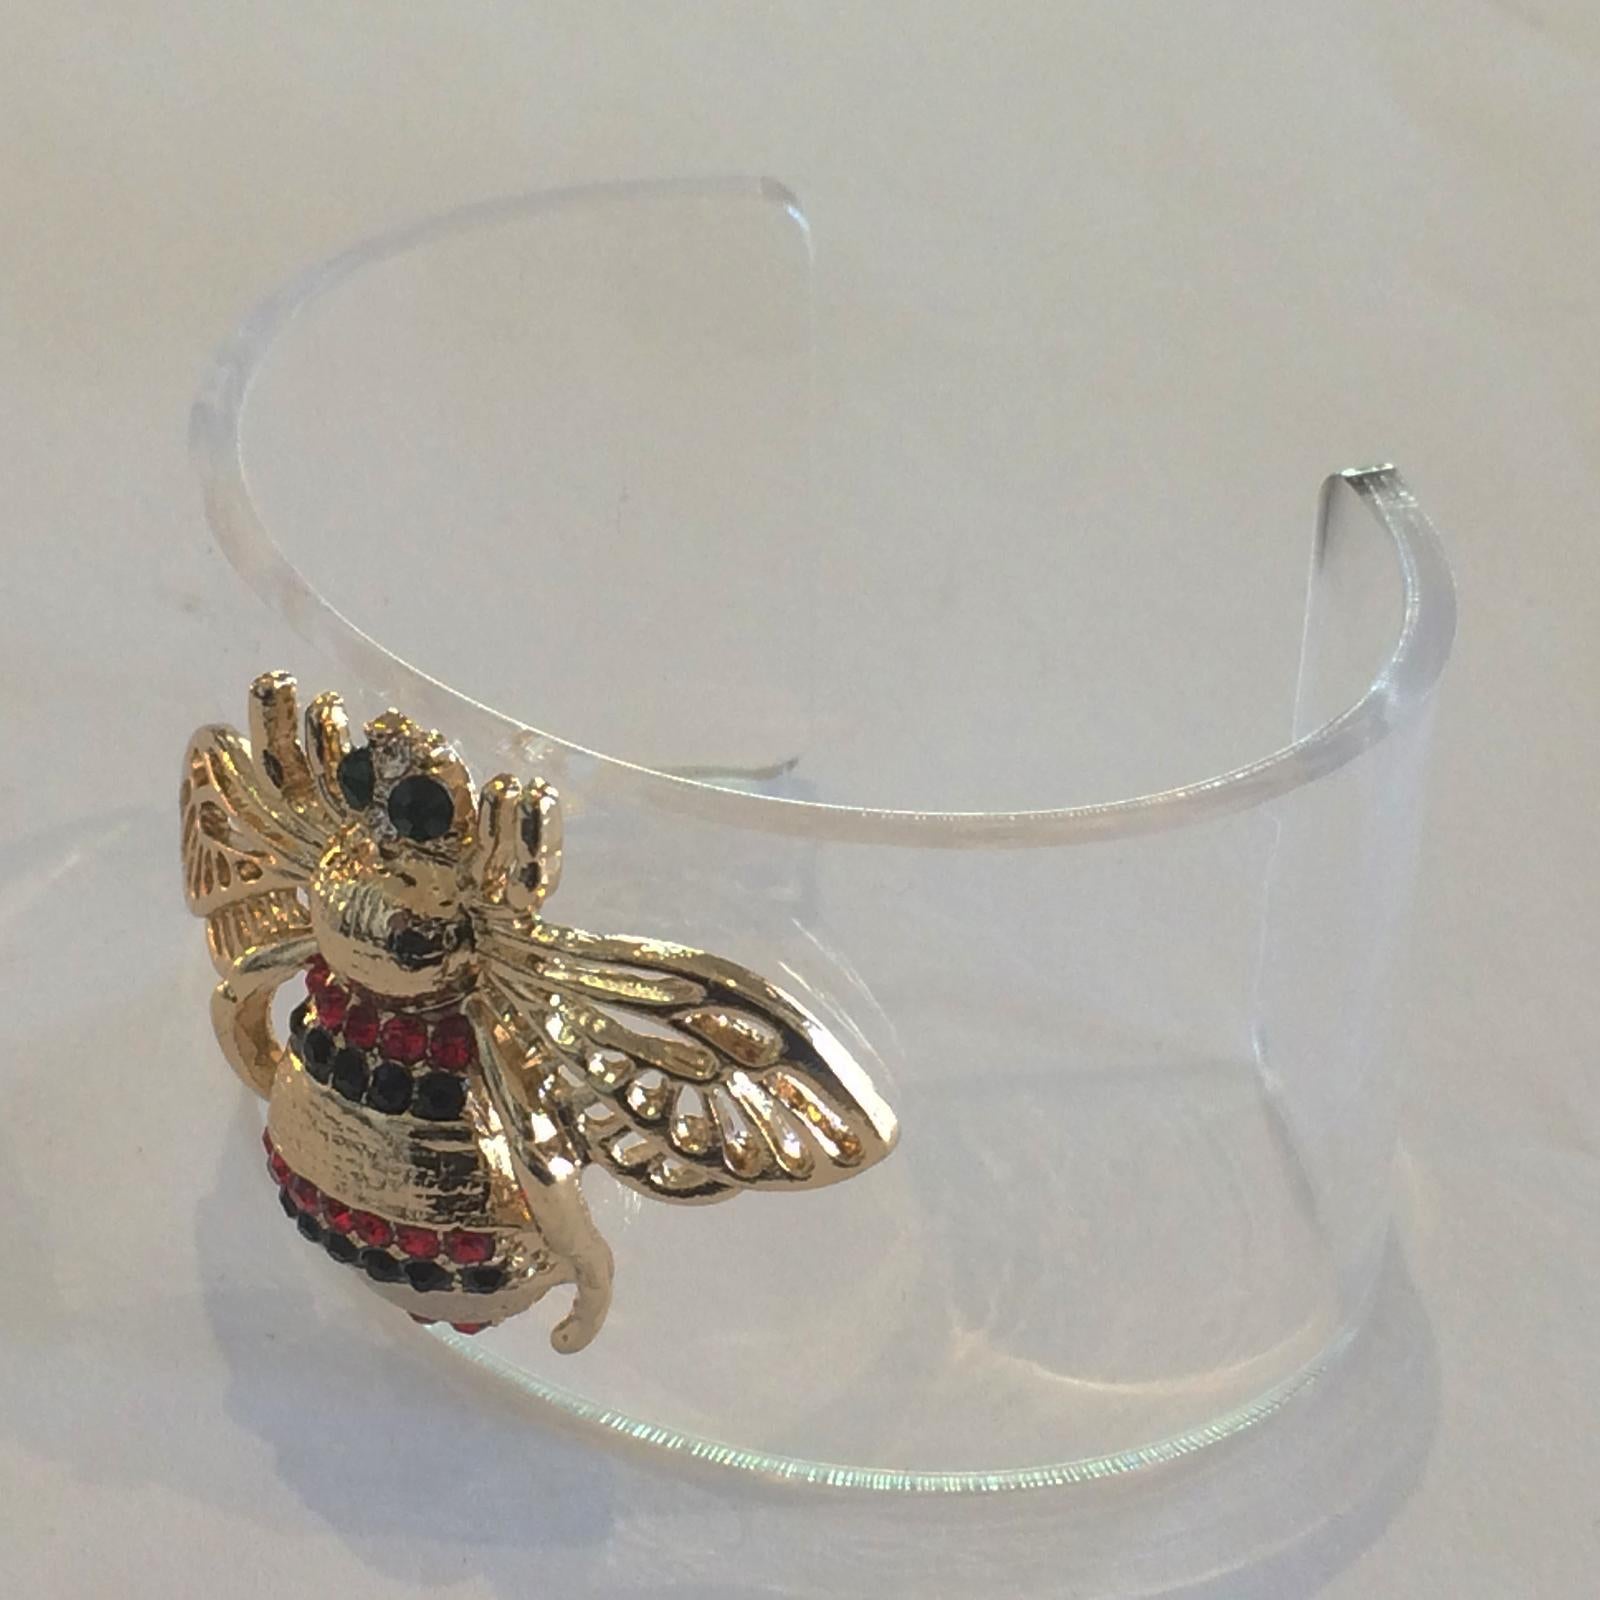 Oscar de la Renta Clear Lucite Bangle with Bumble Bee, Gilt with lines of Red and Black,  Diamantes to create the Bee stripes, and dark green eyes. Absolutely immaculate condition with no repairs or losses. Dimensions are approx.: Oval opening 61mm